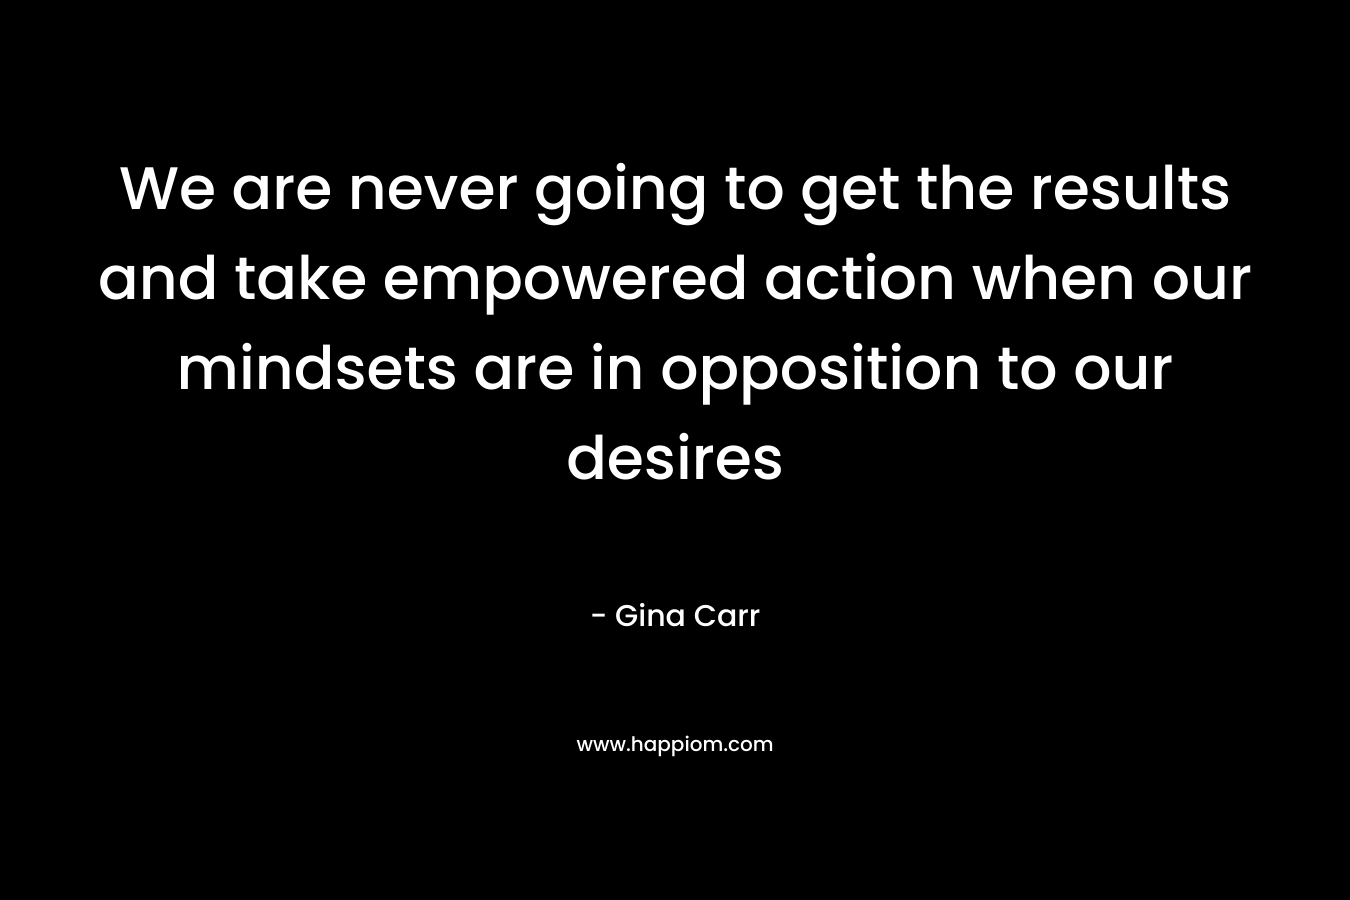 We are never going to get the results and take empowered action when our mindsets are in opposition to our desires – Gina Carr